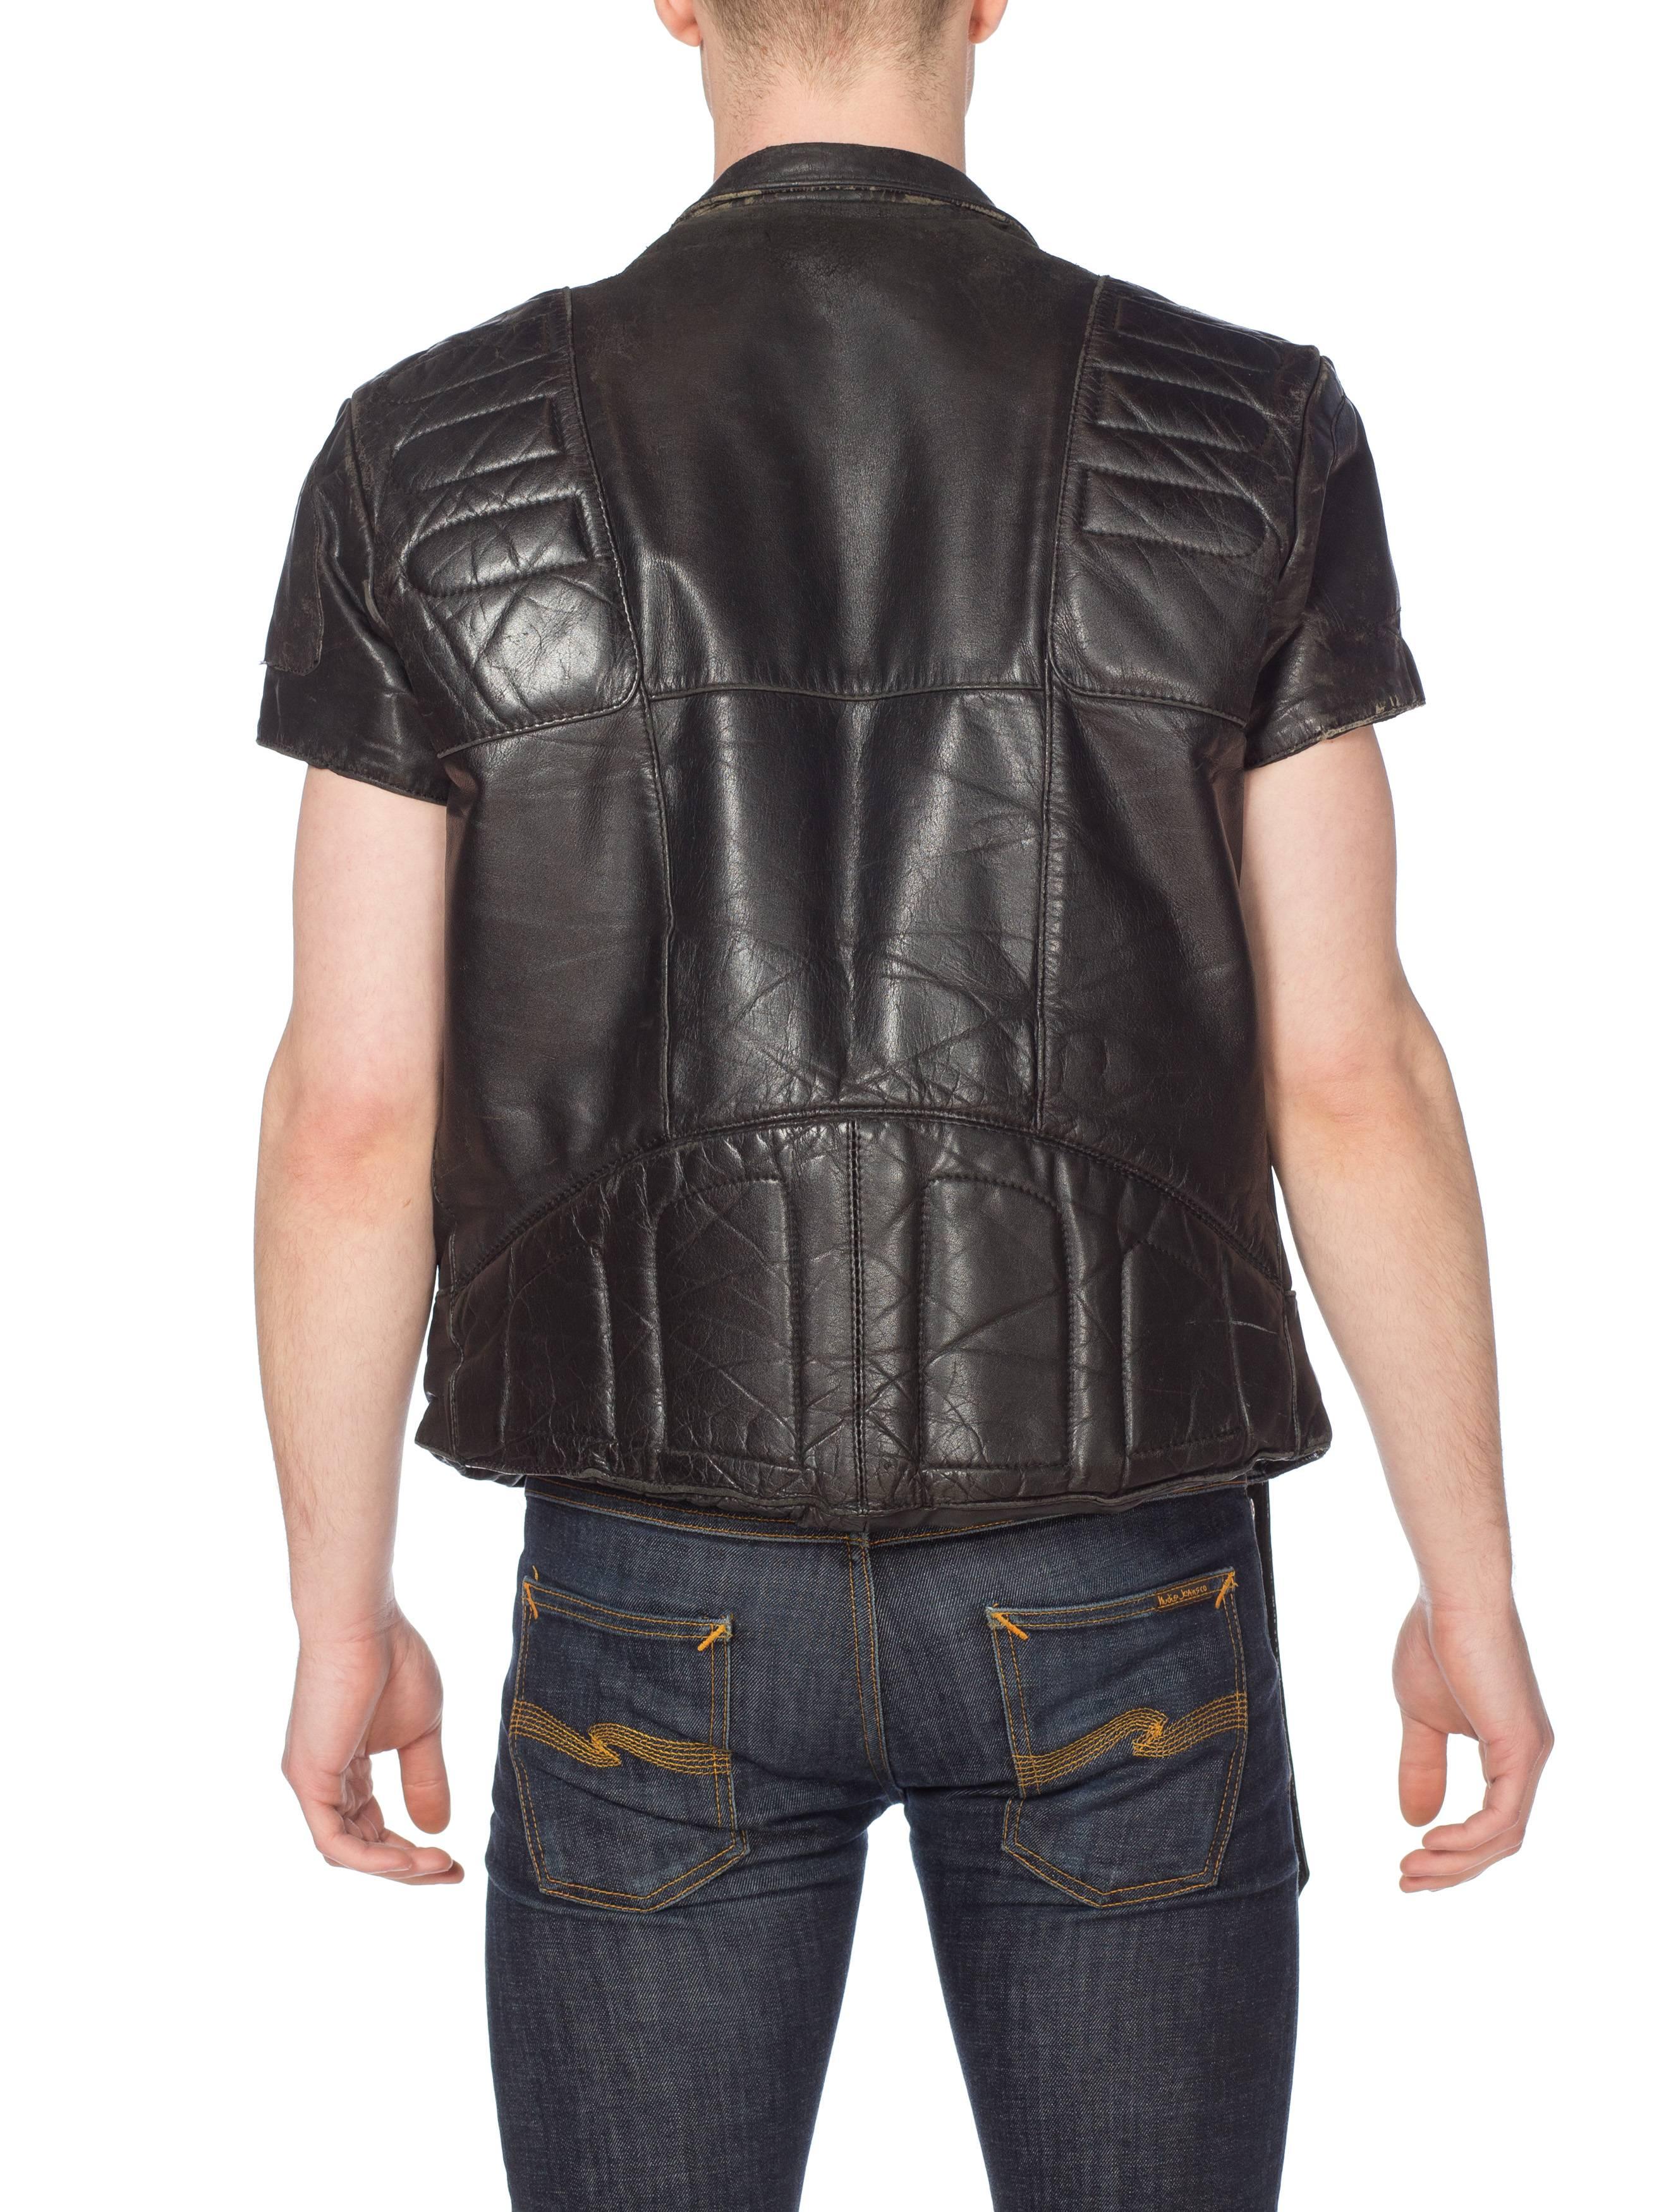 Mens Cropped Sleeve Leather Biker Jacket Formerly Belonging to the Band Justice 5